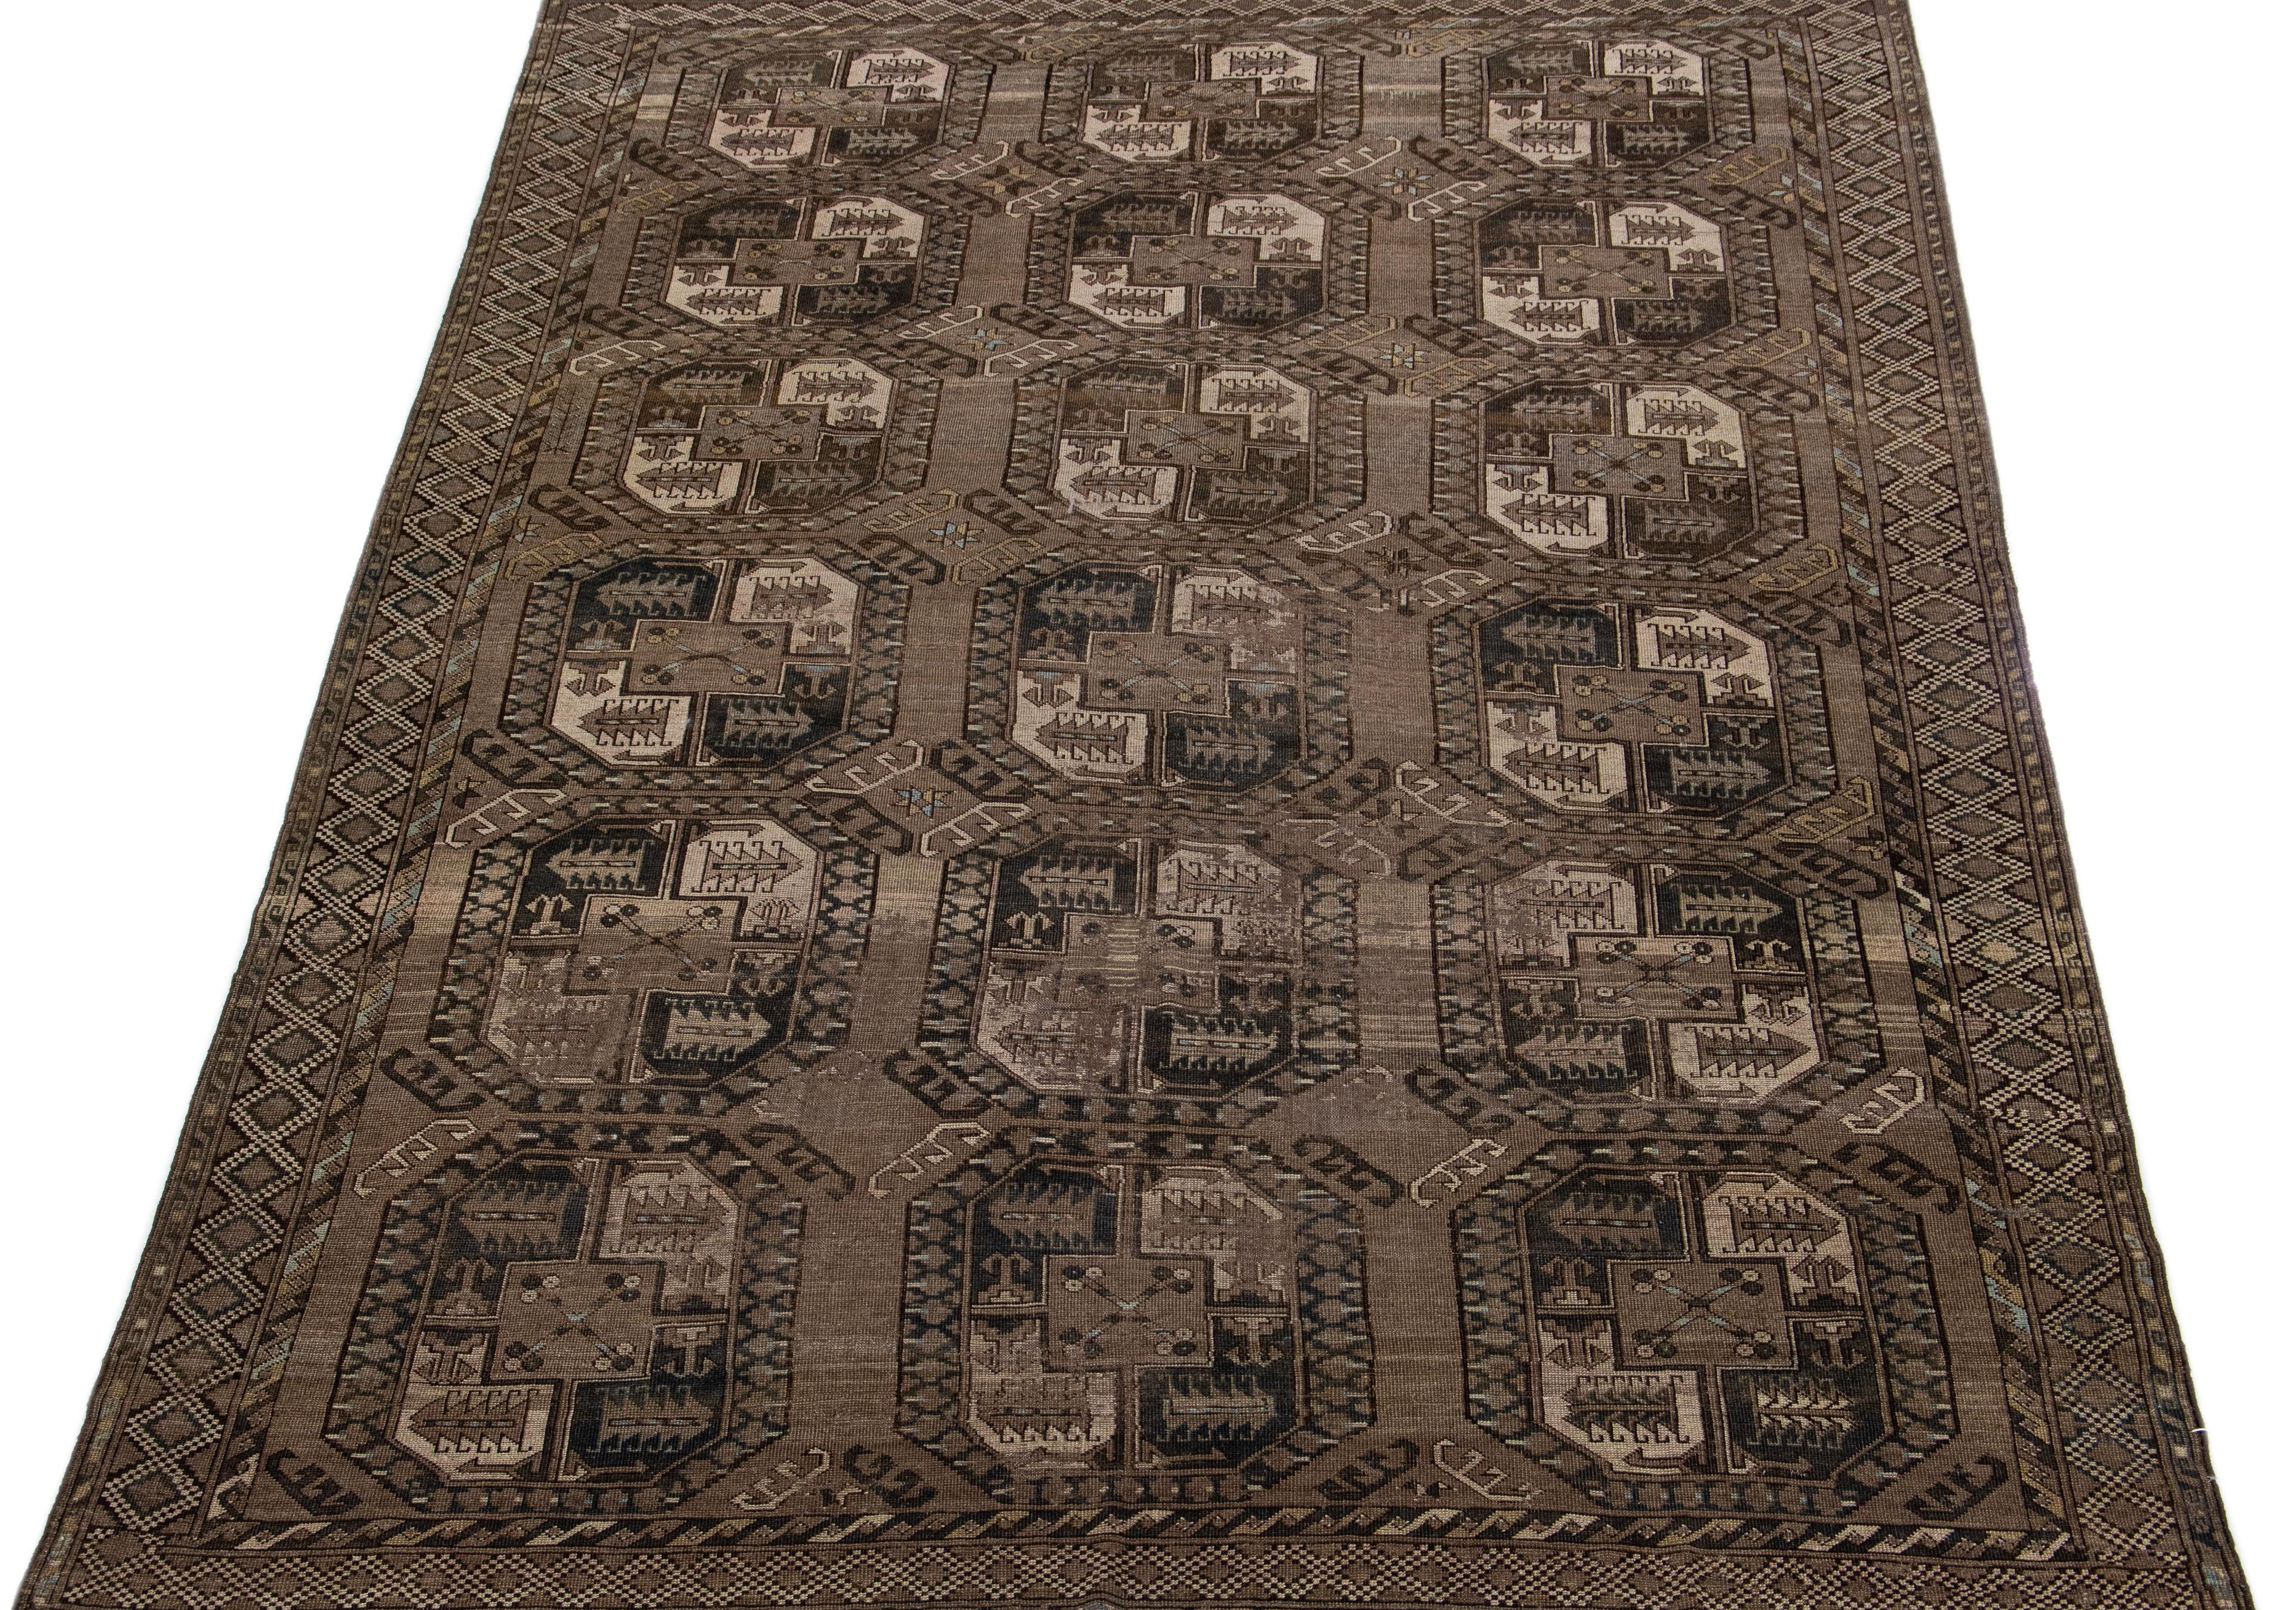 Beautiful antique Turkmen hand-knotted wool rug with a brown color field. This Persian piece has a gorgeous Gul pattern design in beige and blue.

This rug measures: 7'1